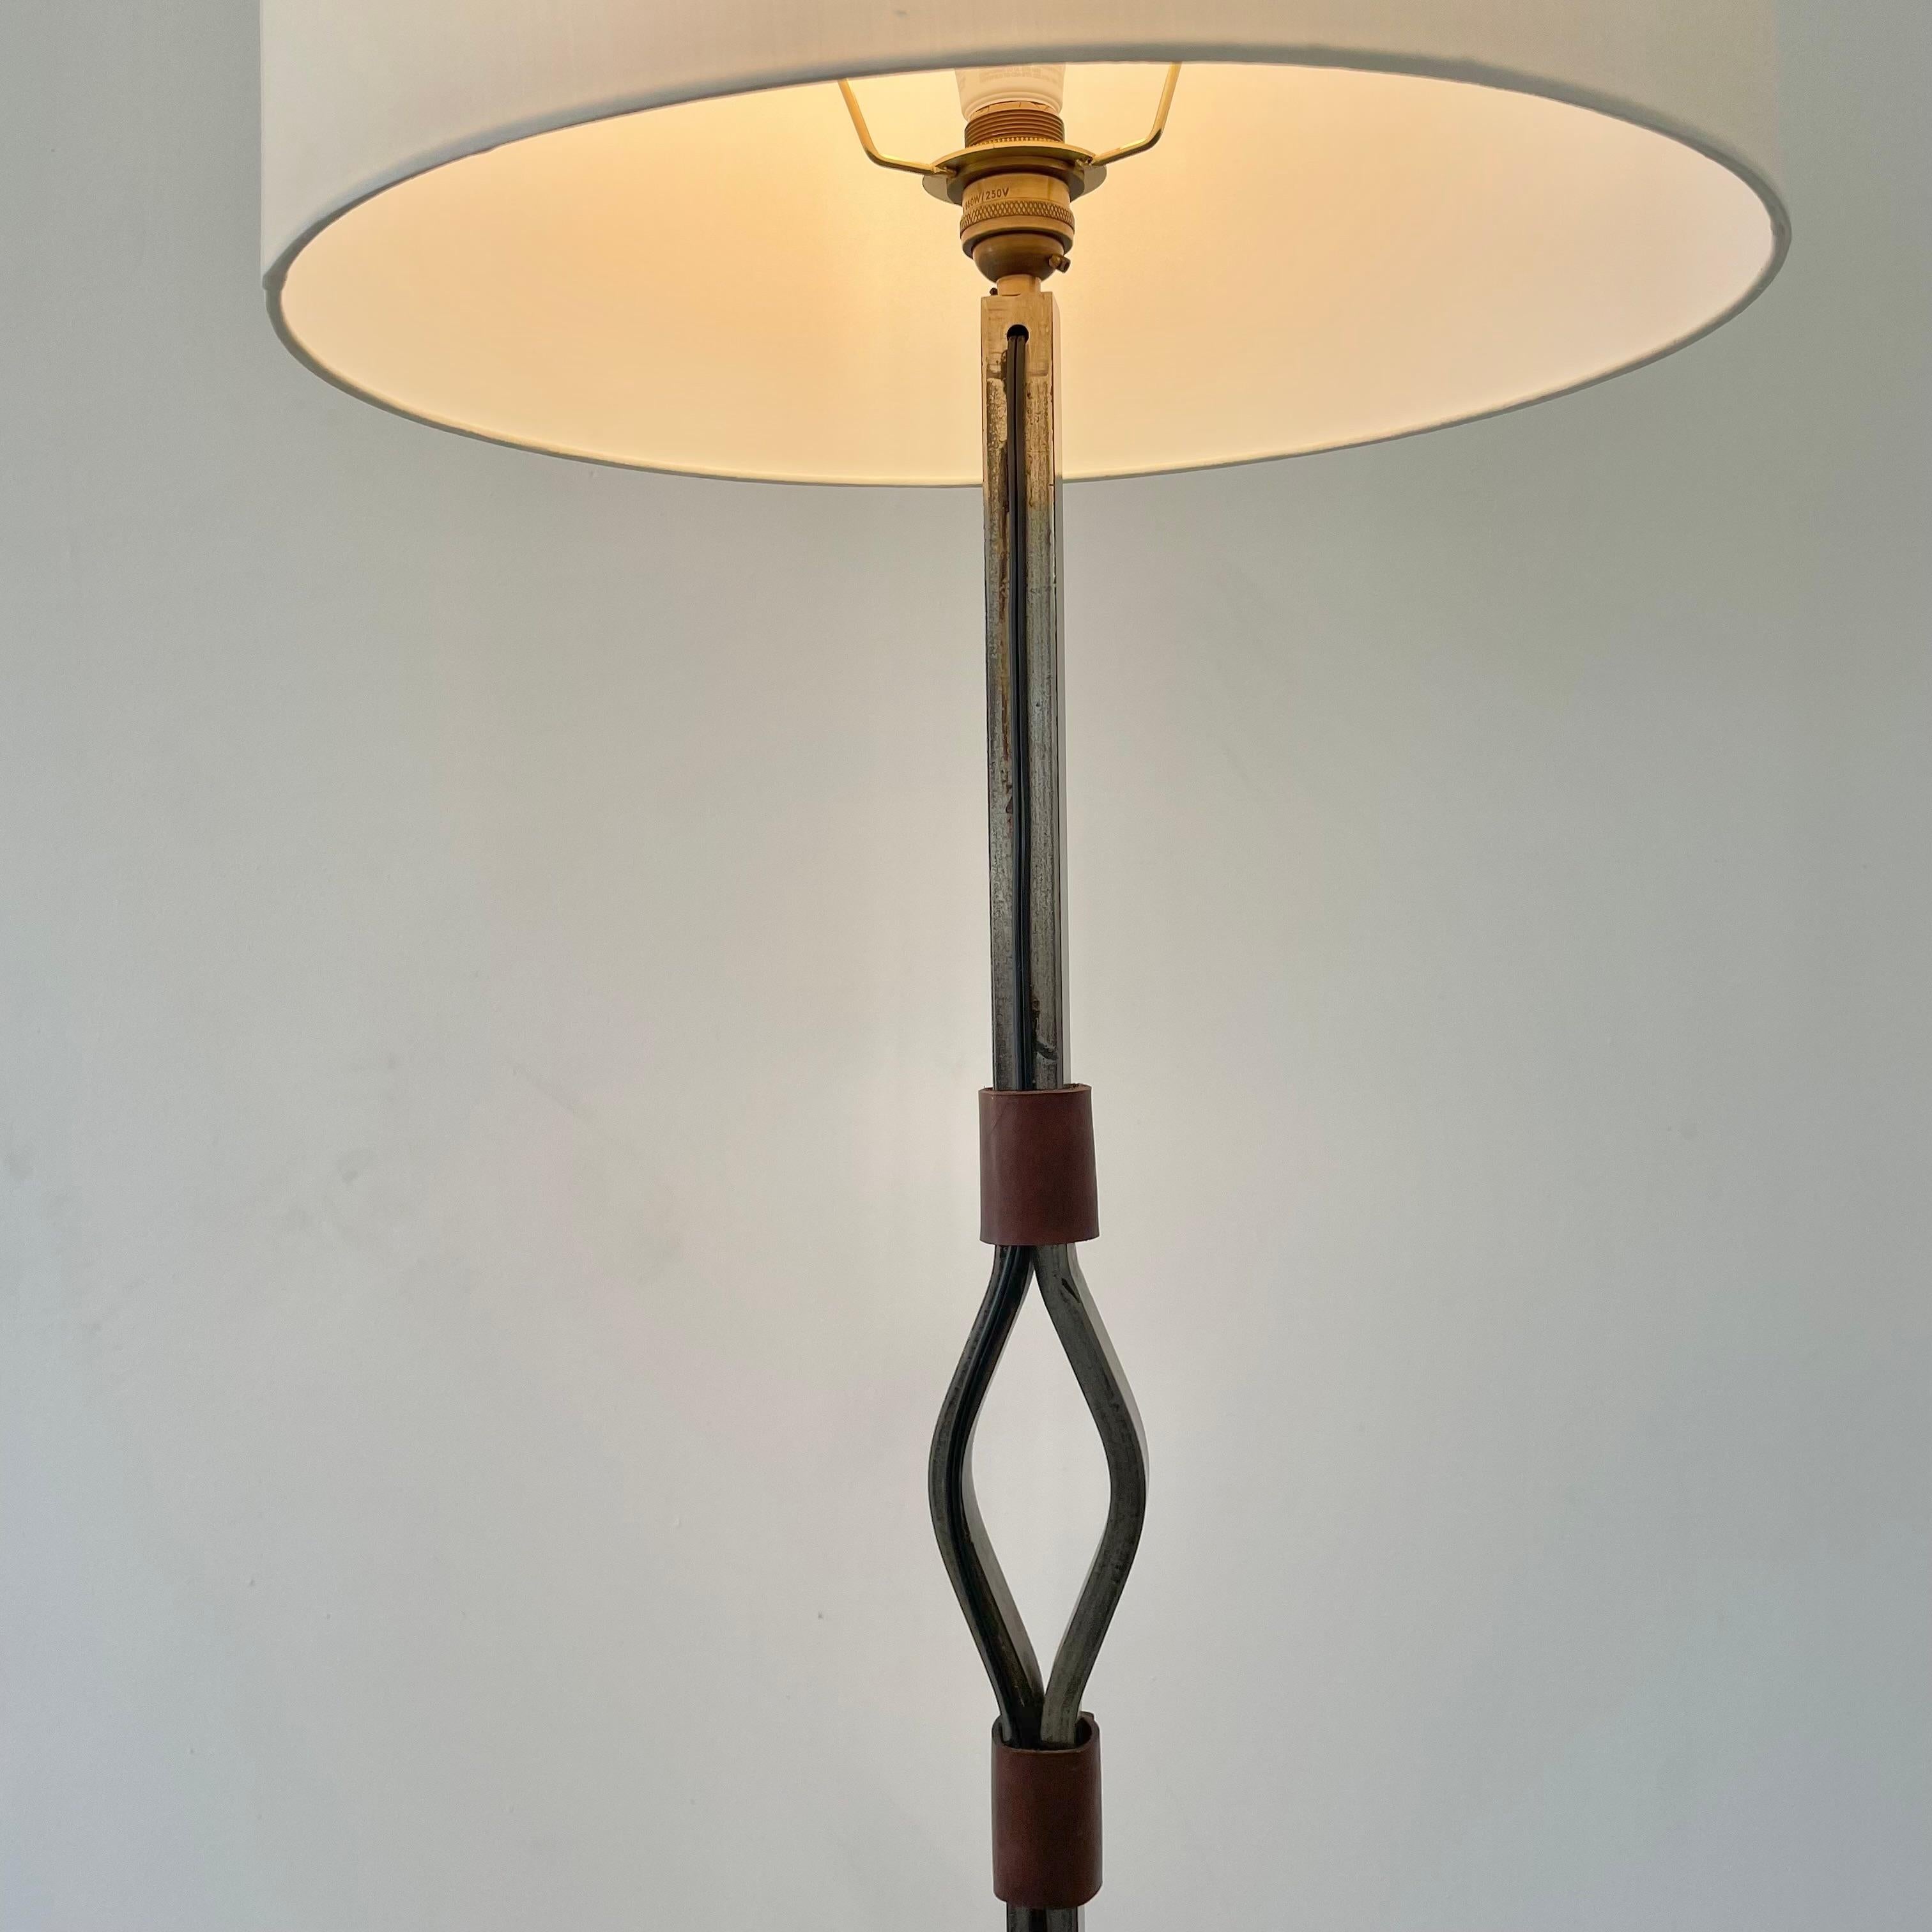 Jacques Adnet Steel and Leather Floor Lamp, 1950s France For Sale 2